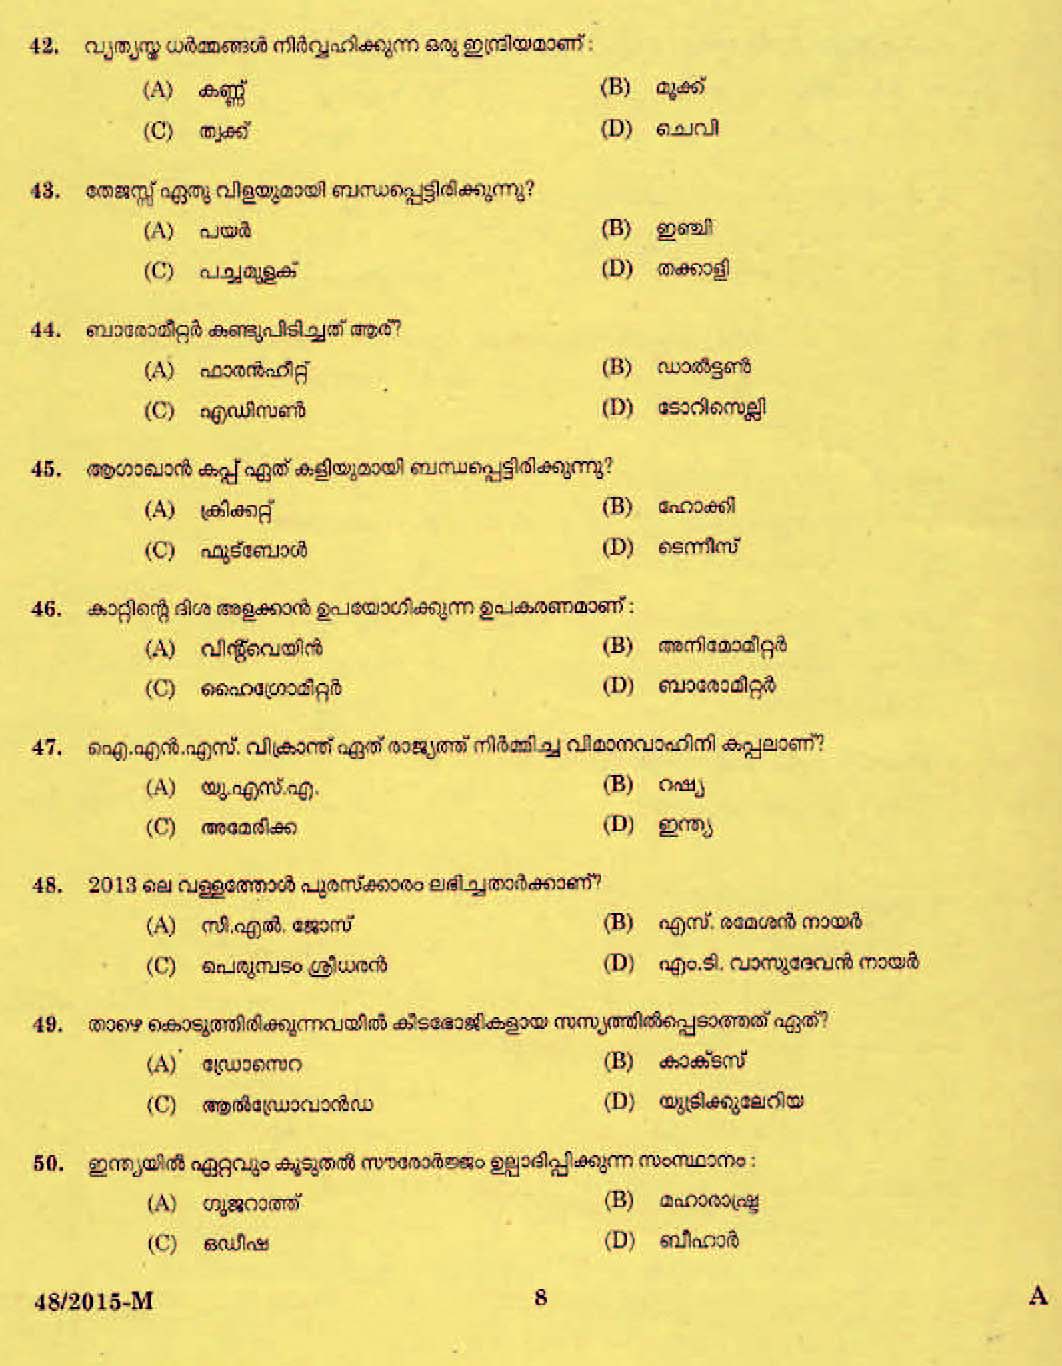 LD Clerk Bill Collector Question Paper Malayalam 2015 Paper Code 482015 M 6